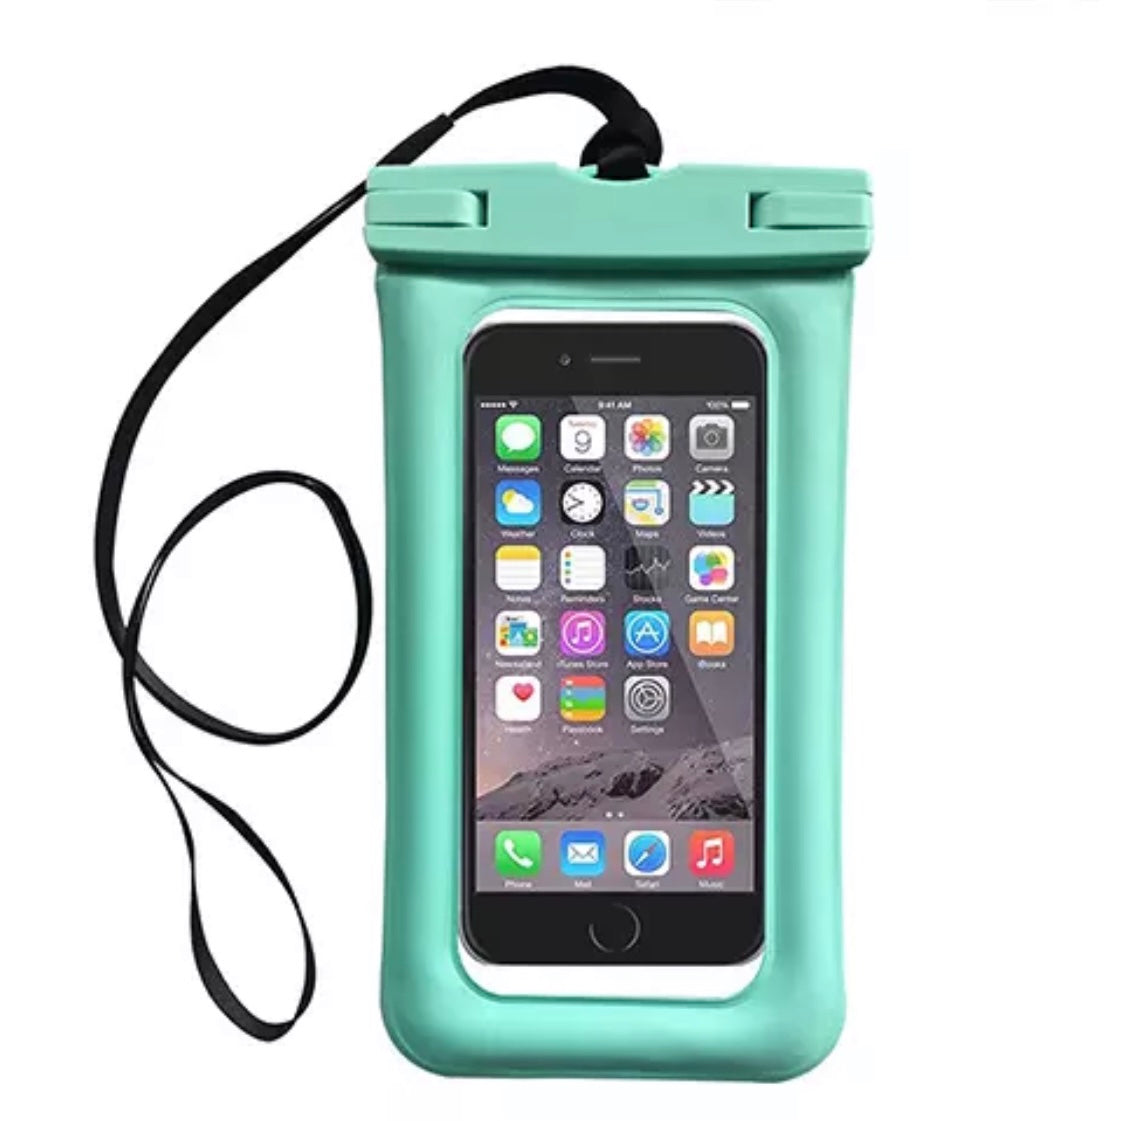 Waterproof mobile case - Turquoise